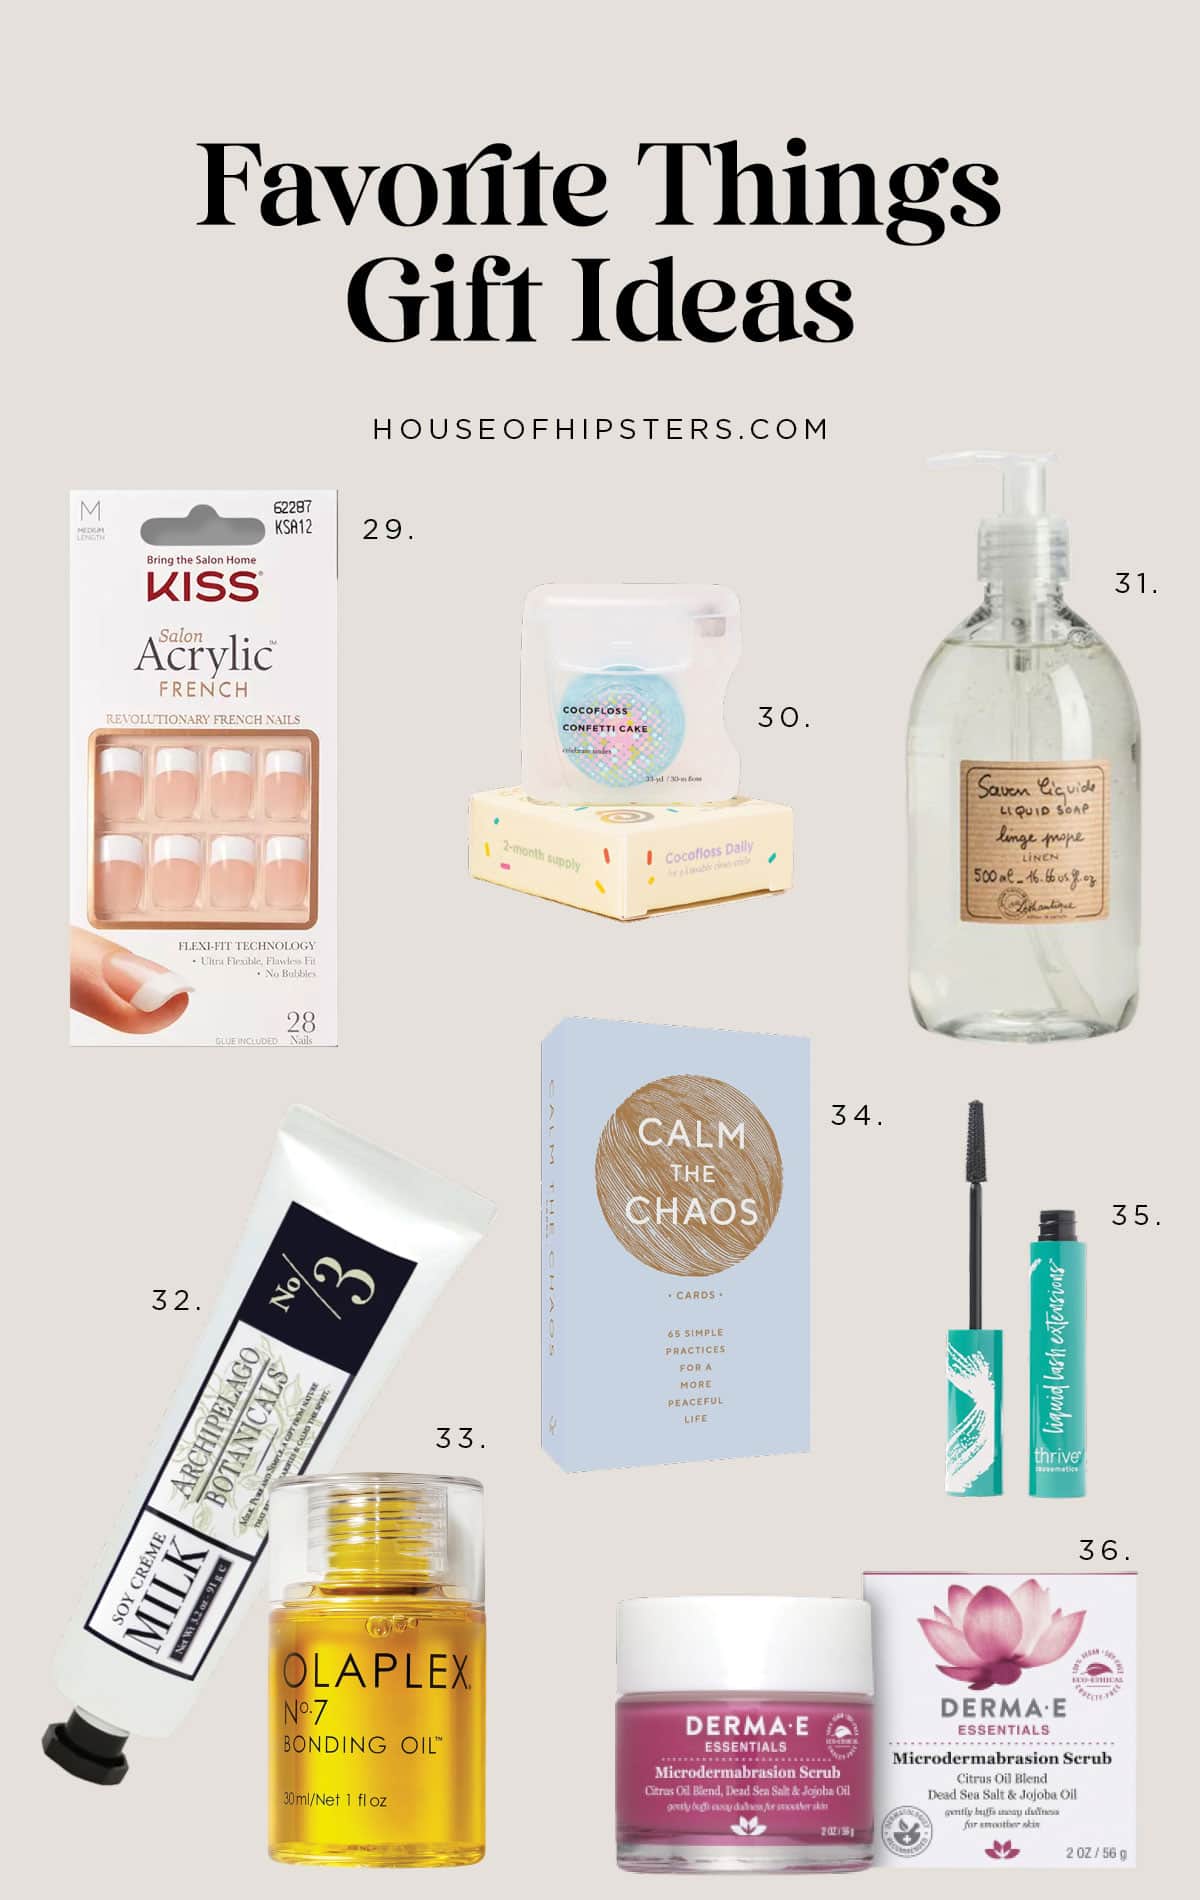 45 Favorite Things Gift Ideas for your next holiday party from press on nails to the best hand soap to mascara.